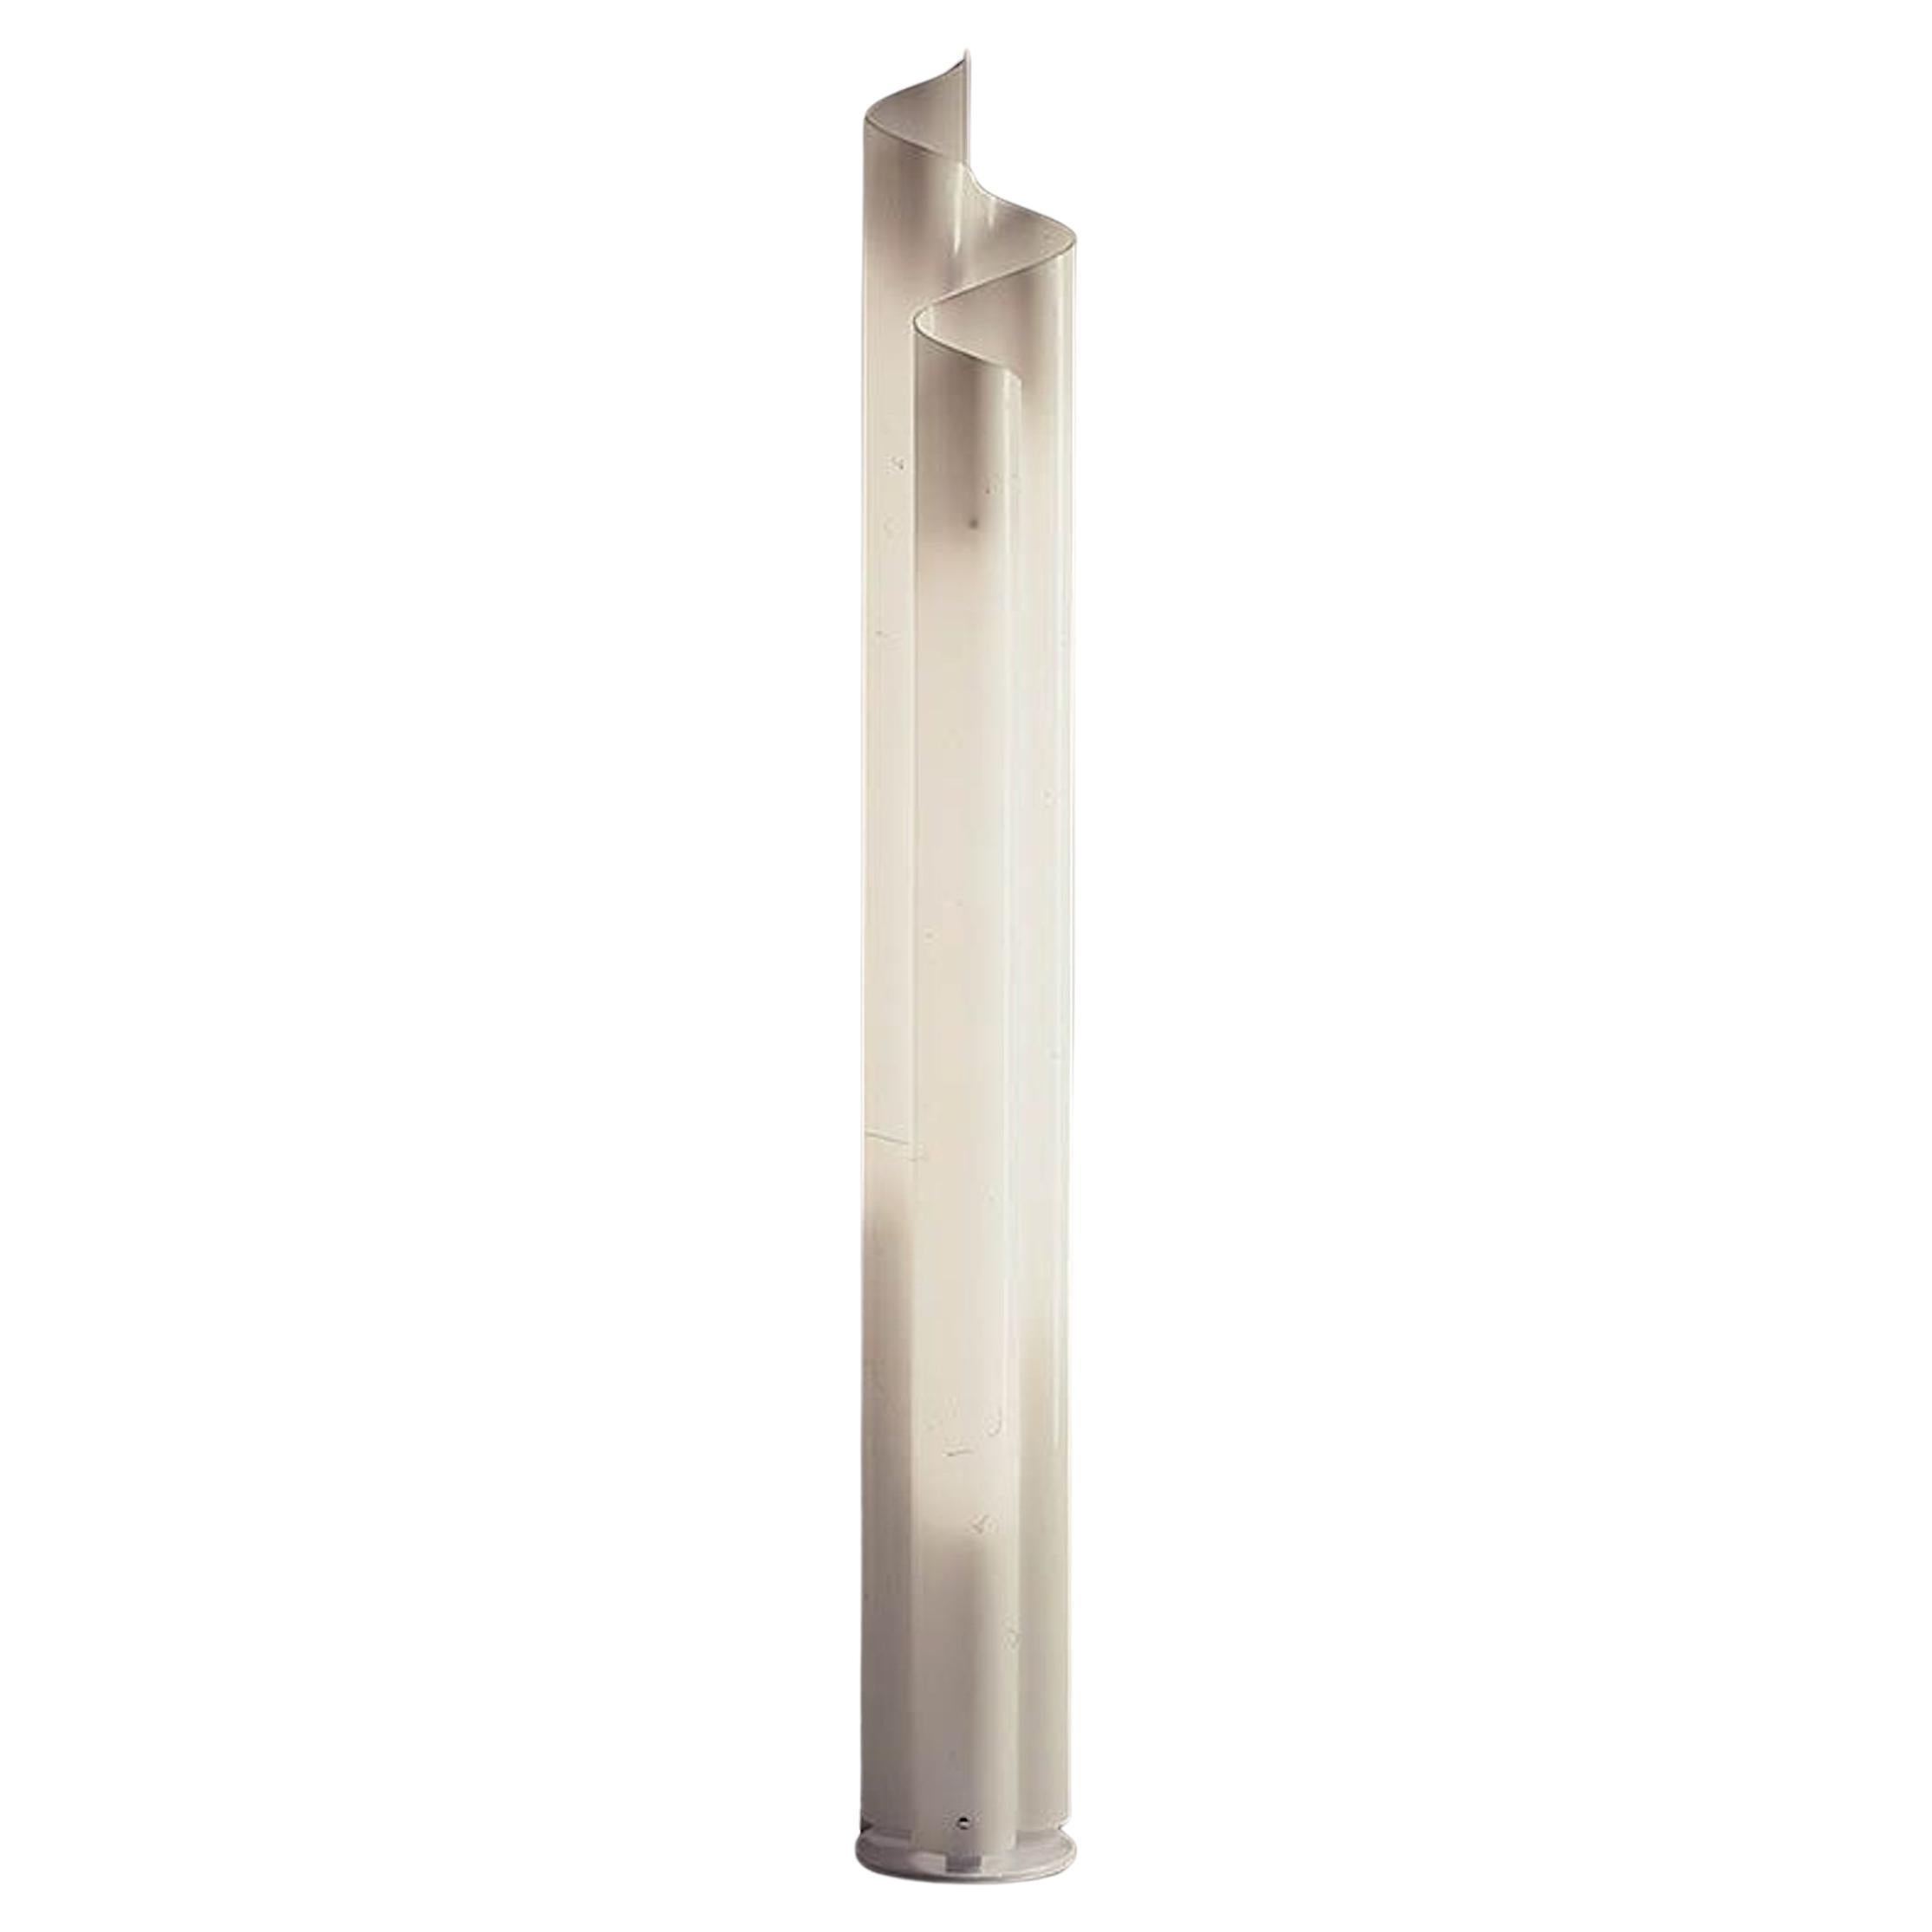 Vico Magistretti, Chimera Floor Lamp for Artemide, Italy, 1960s (Old Edition) For Sale